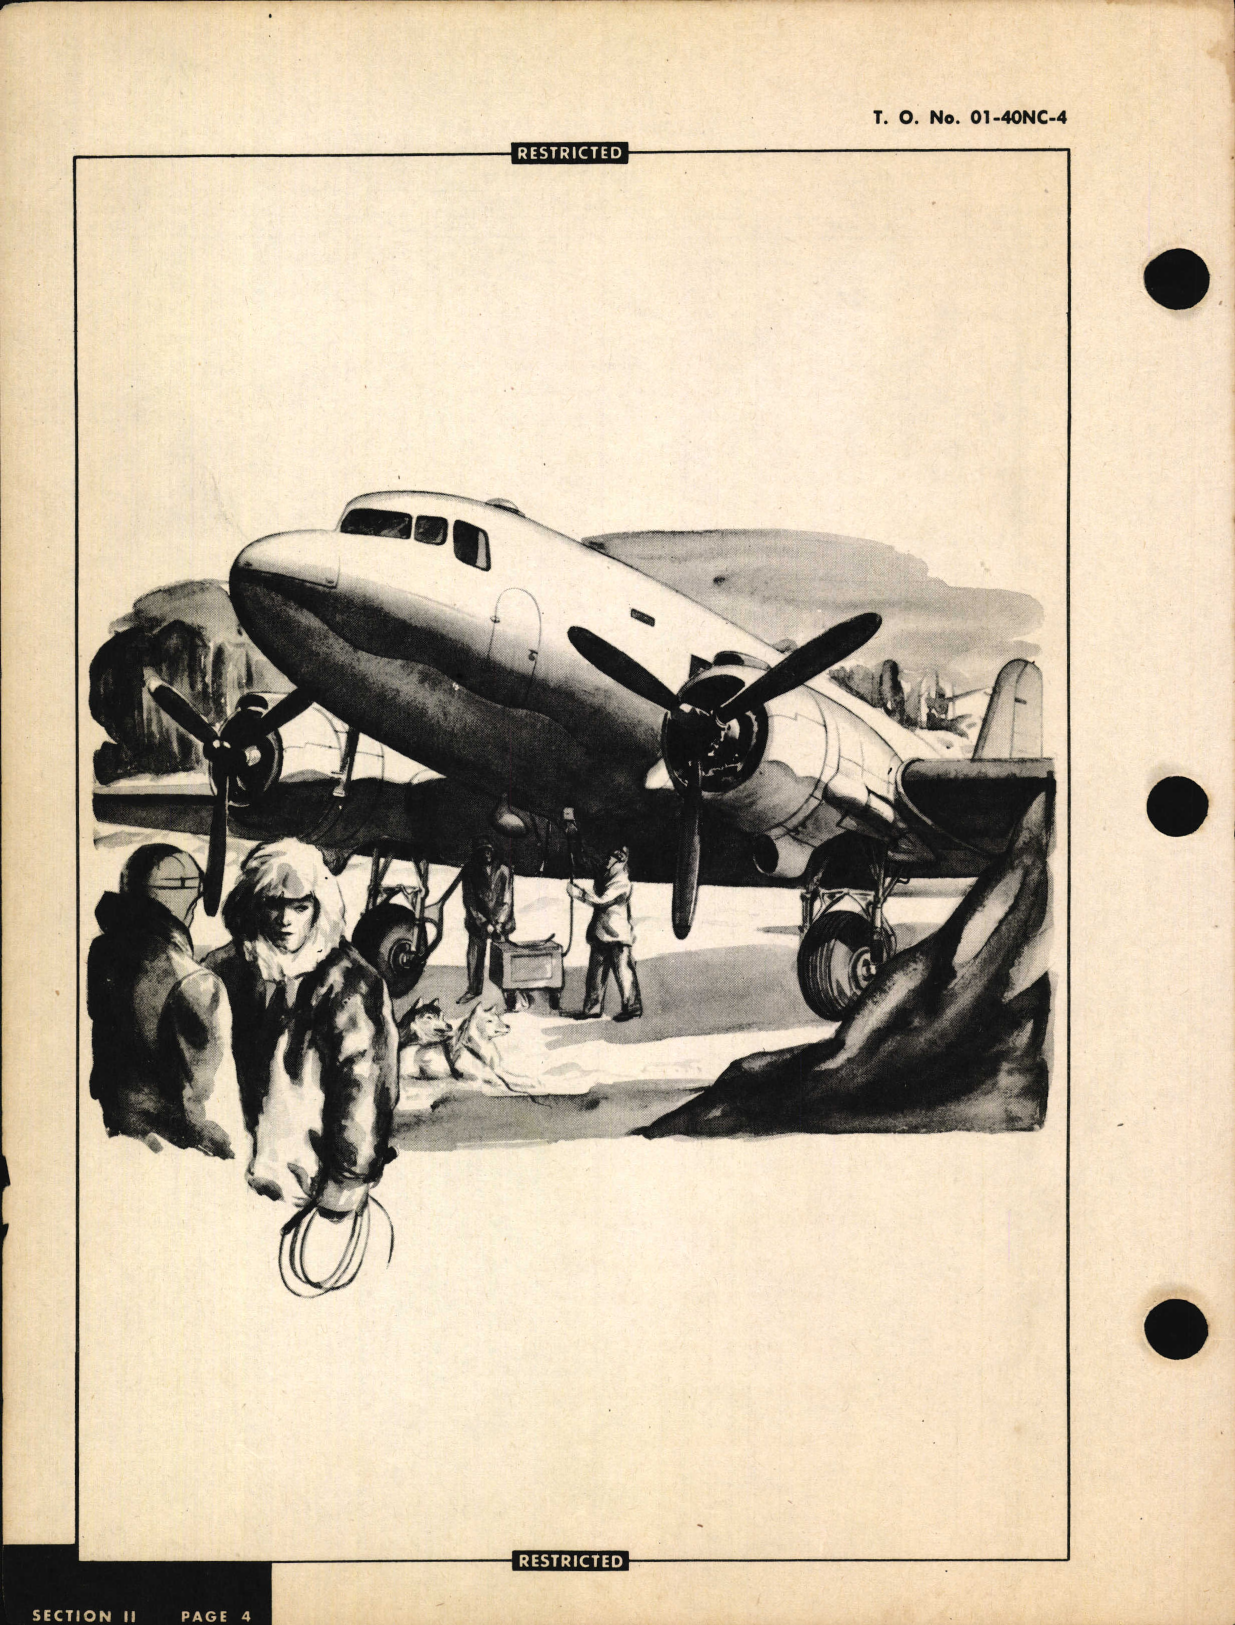 Sample page 8 from AirCorps Library document: Parts Catalog for C-47, R4D-1, and Dakota I